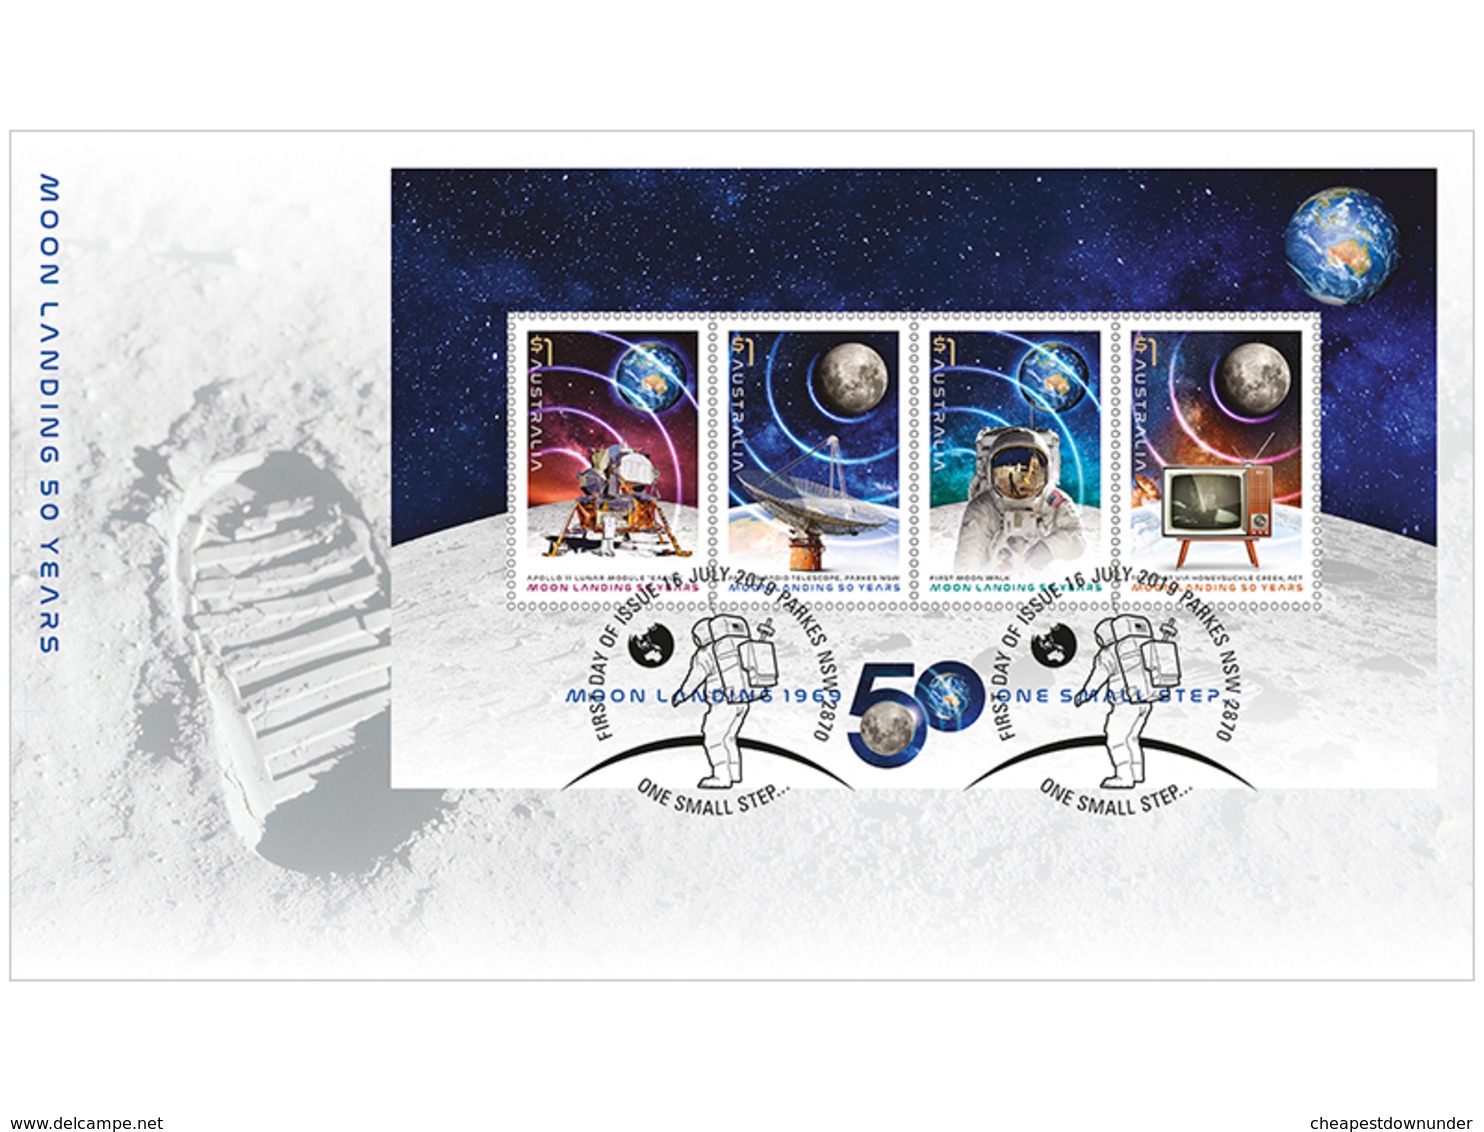 Australia 2019 Minisheet First Day Cover FDC - Moon Landing 50 Years - Premiers Jours (FDC)